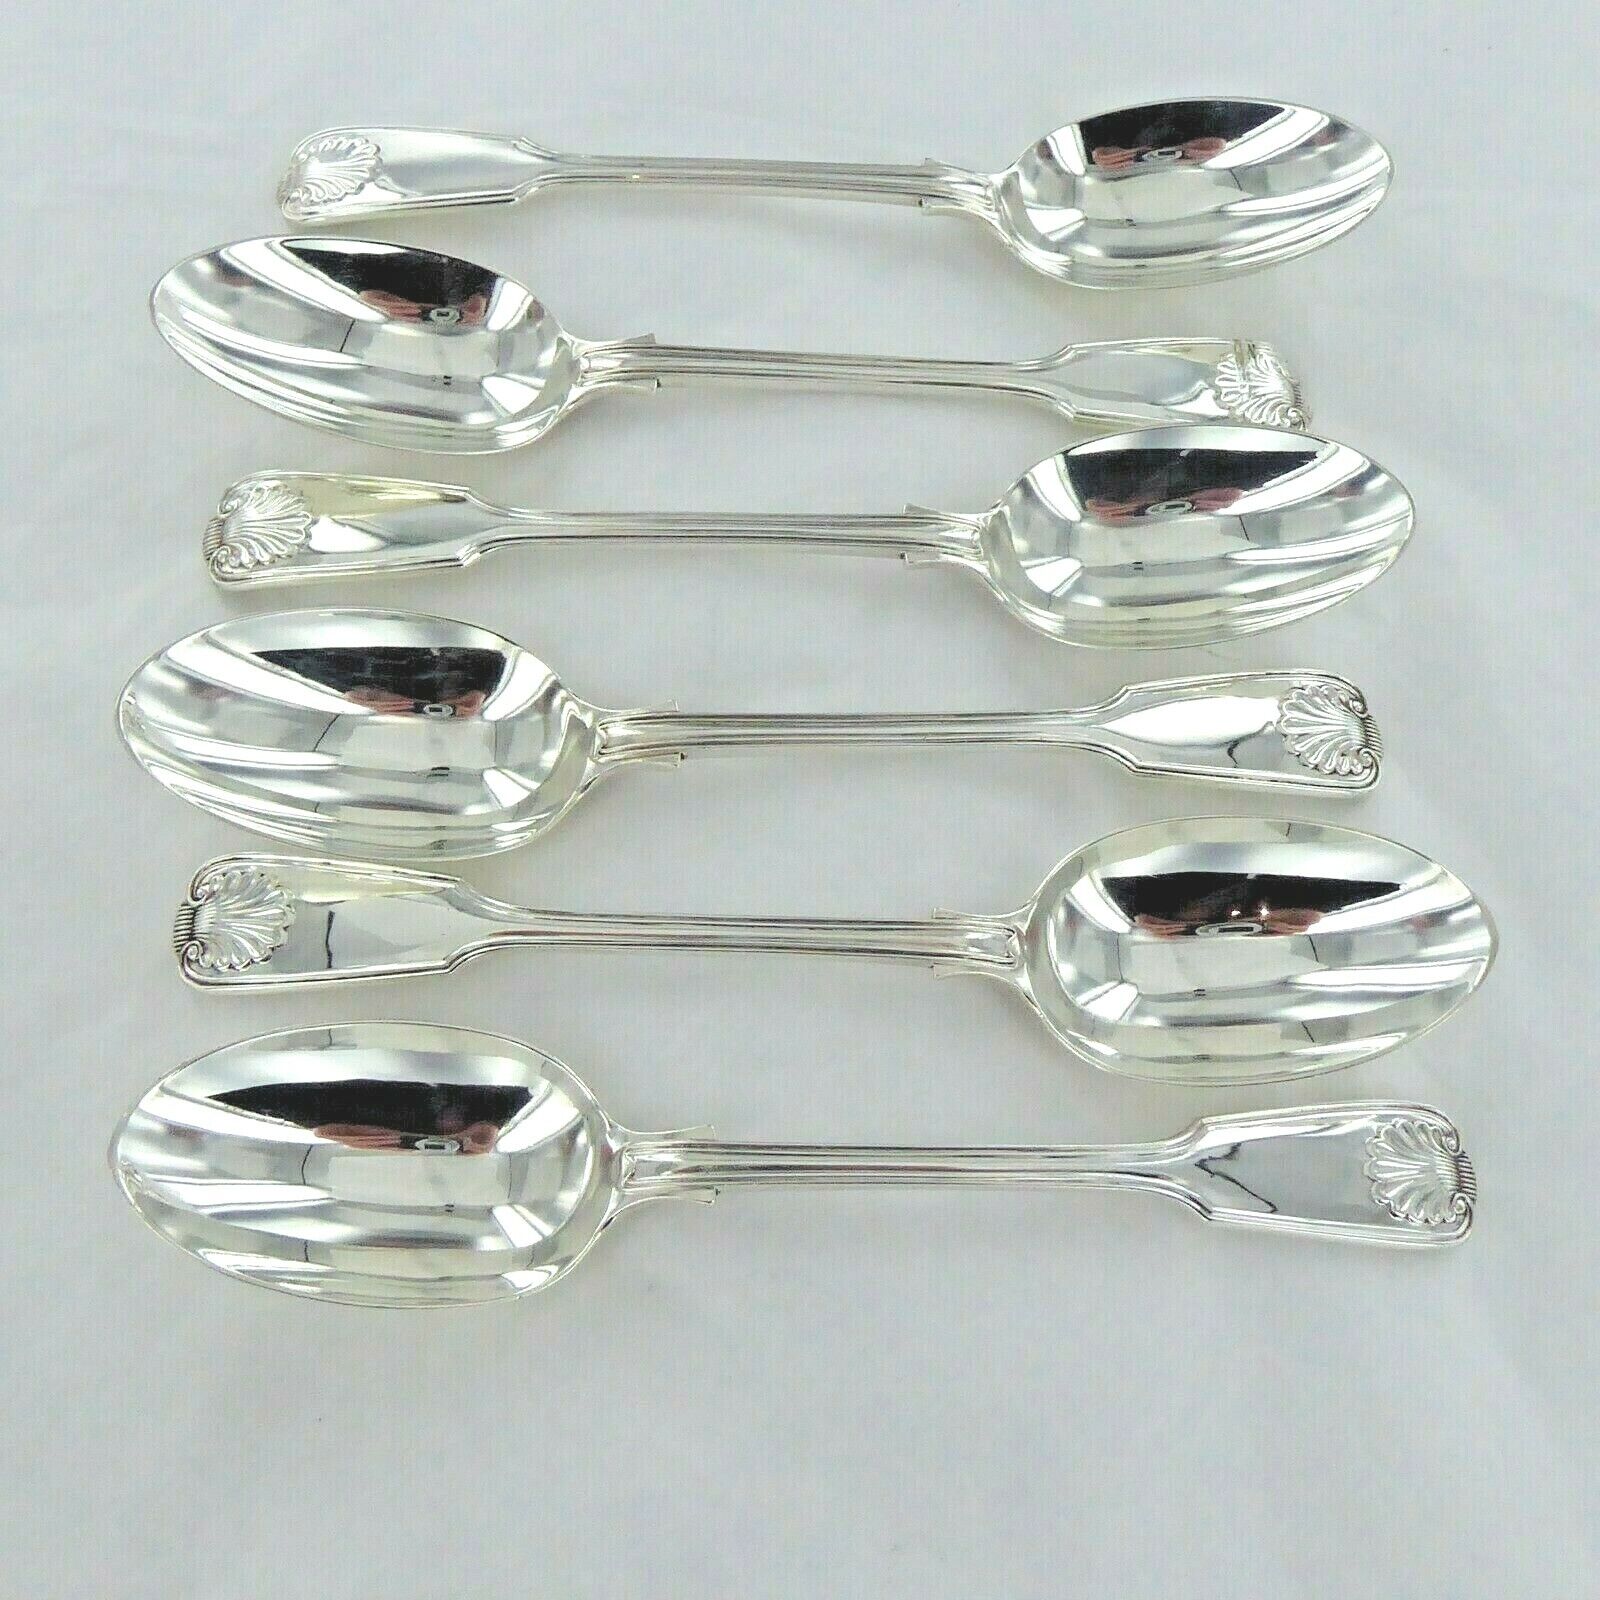 GOOD STERLING SILVER SET OF 6 FIDDLE THREAD AND SHELL DESSERT SPOON LONDON 1904